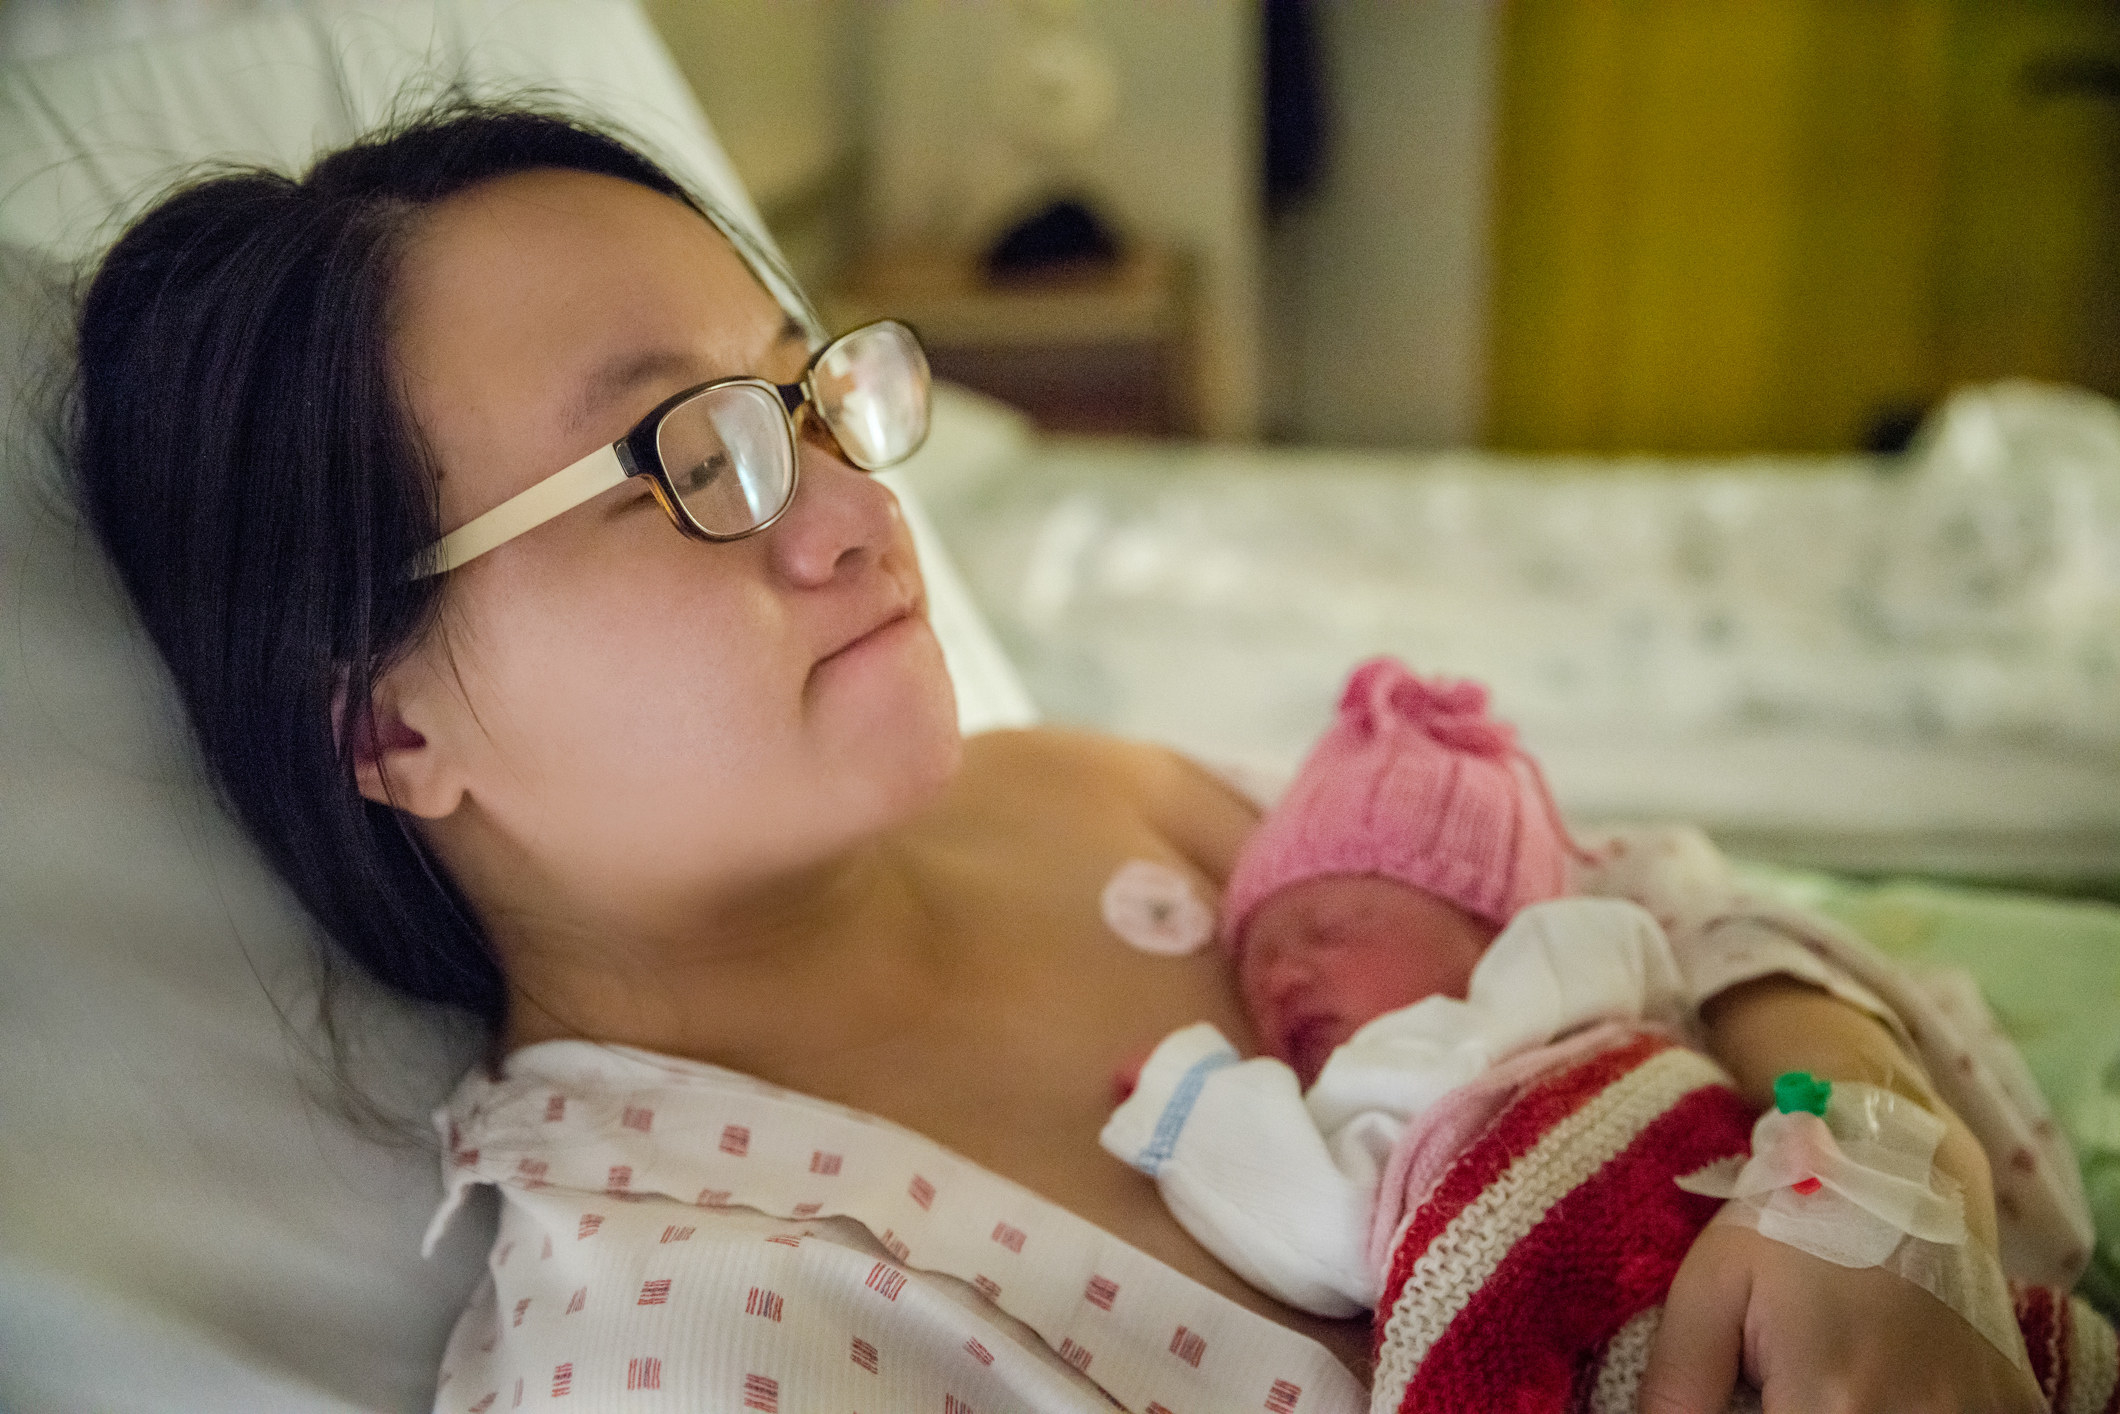 A mother lies in a hospital bed with her newborn lying on her chest.